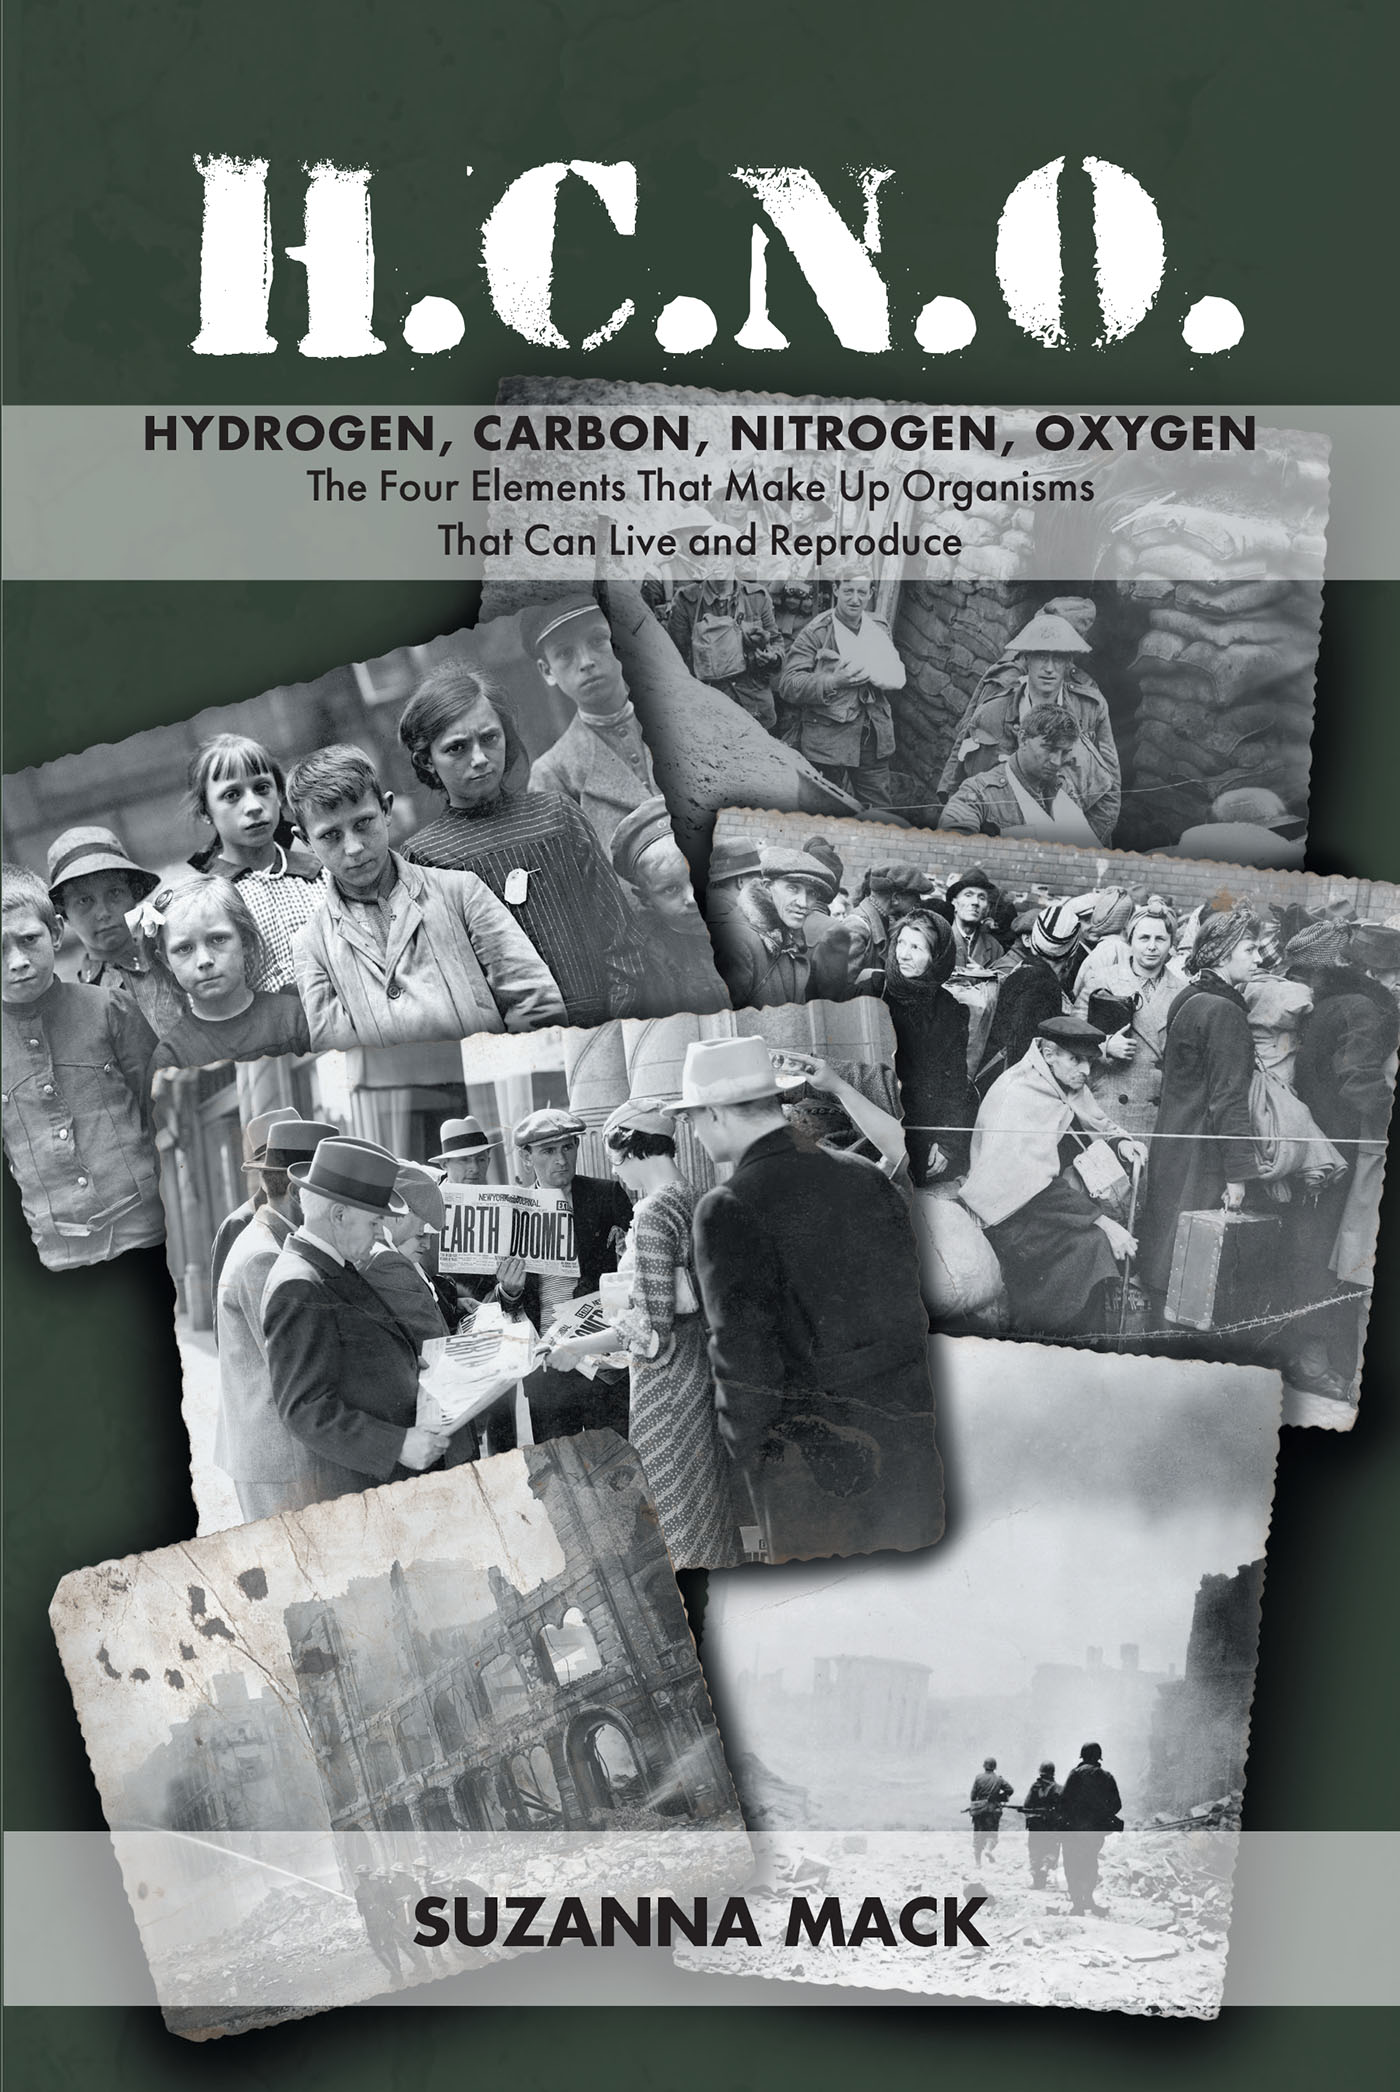 Author Suzanna Mack’s New Book, “H.C.N.O. Hydrogen, Carbon, Nitrogen, Oxygen," Centers Around the Antersecting Lives of Four People Fighting for Survival During WWII